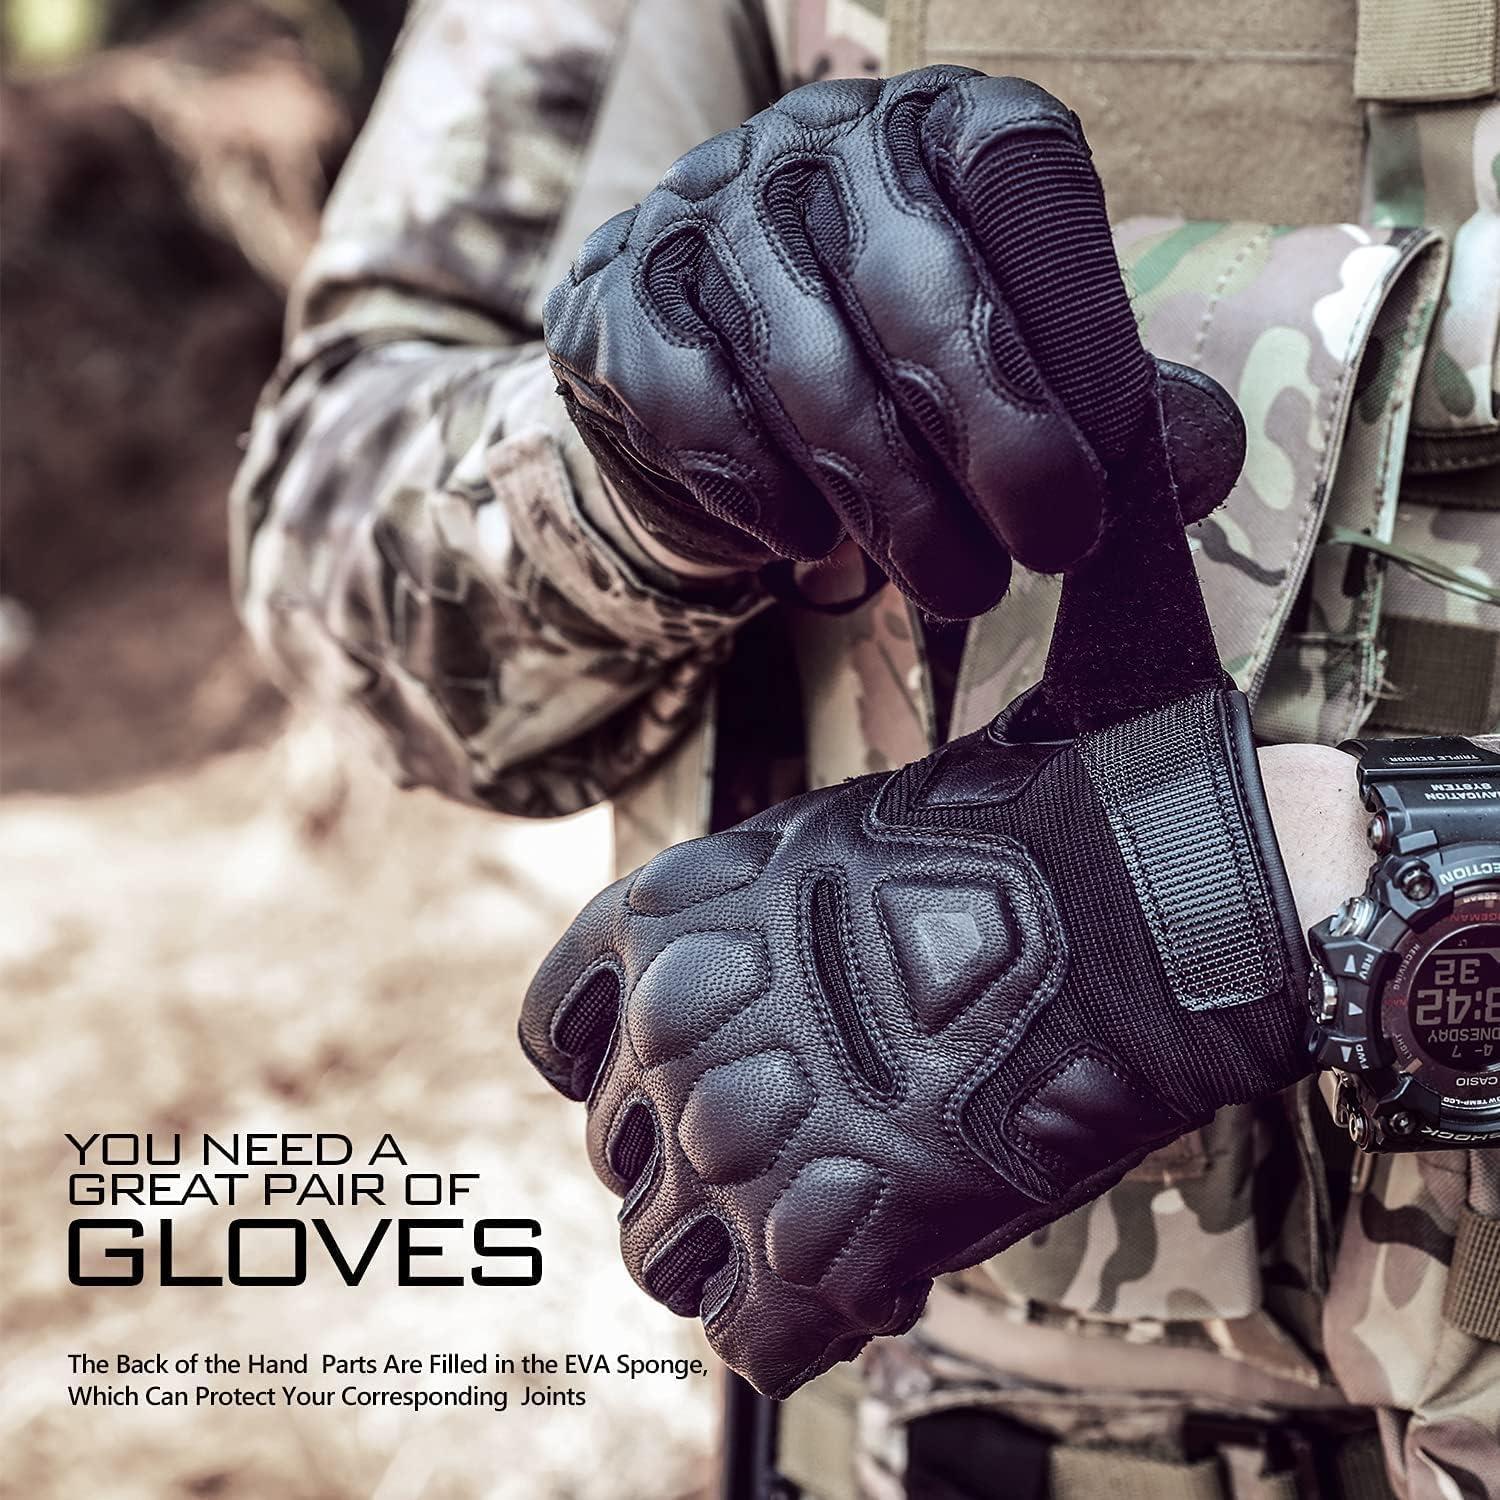 Tactical Fingerless Leather Gloves